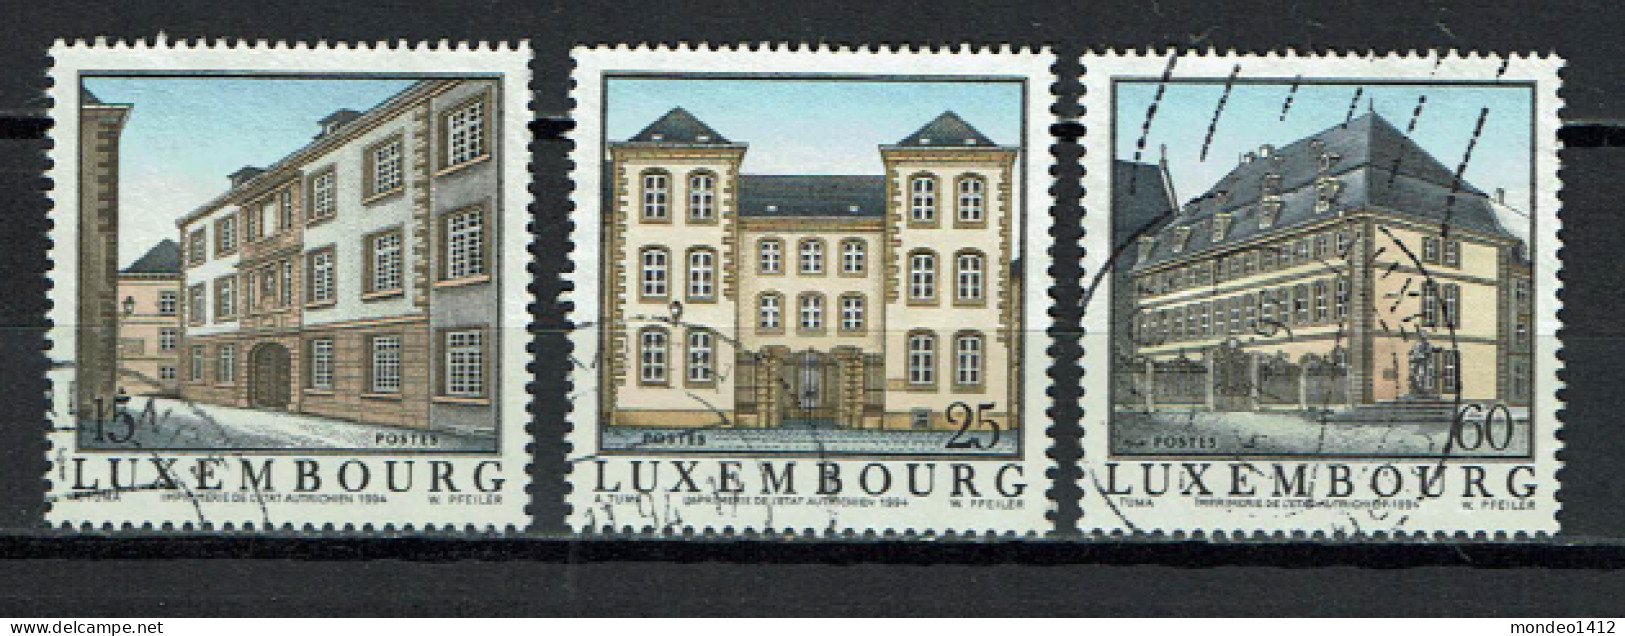 Luxembourg 1994 - YT 1300/1302 - Former Refugees In Luxembourg, Anciens Refuges - Used Stamps